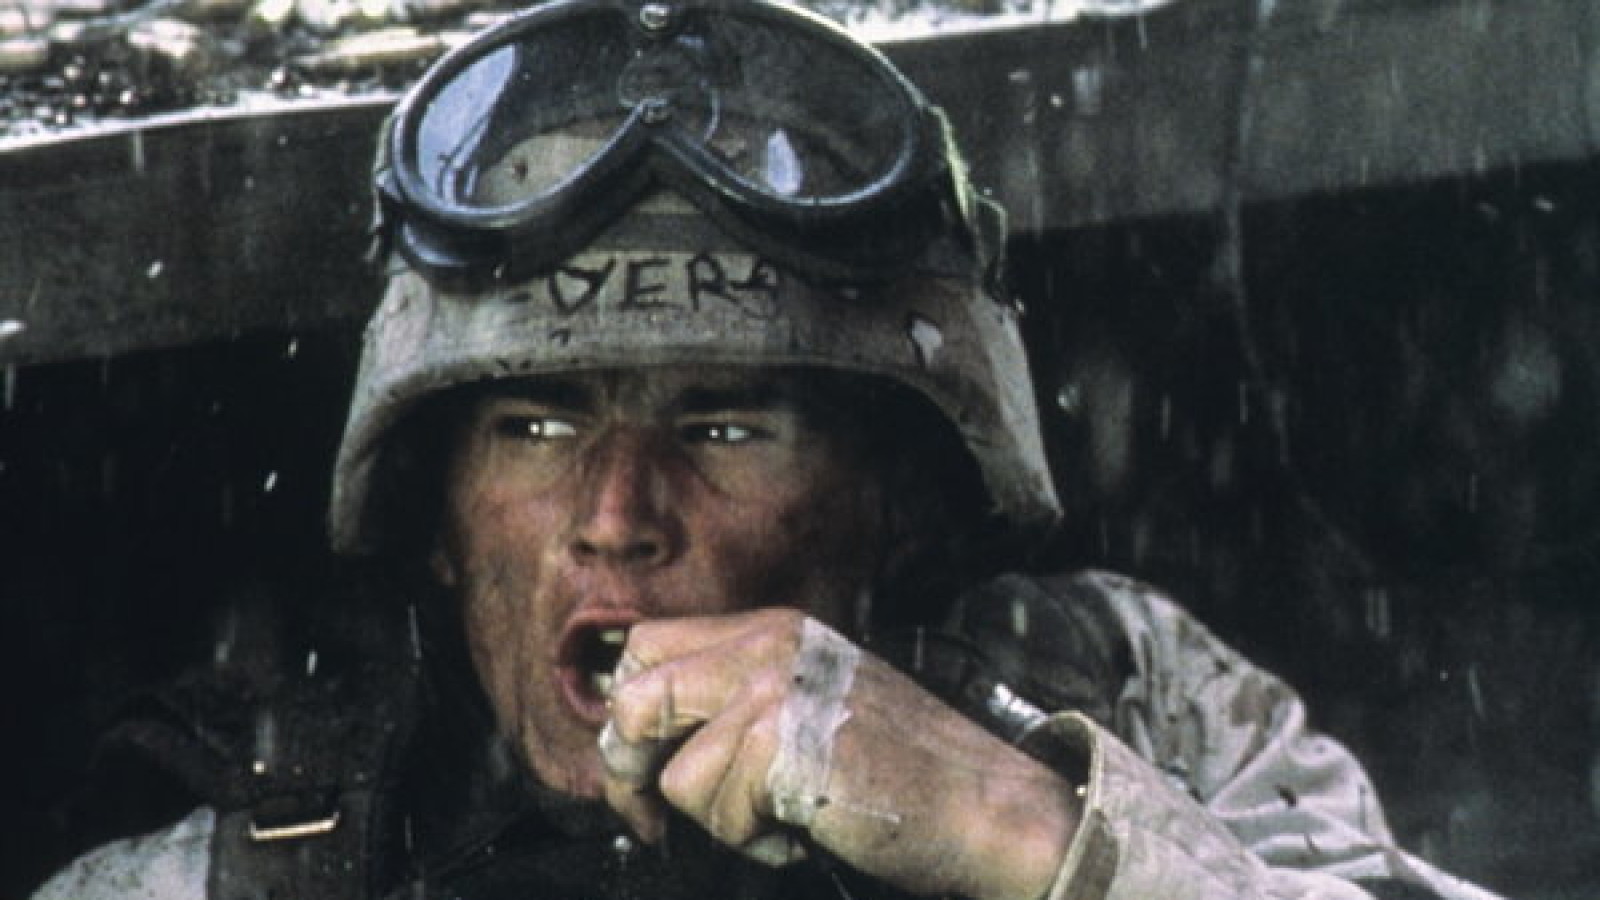 Black Hawk Down - Get on that 50!</a><br> by <a href='/profile/Bling-King/'>Bling King</a>